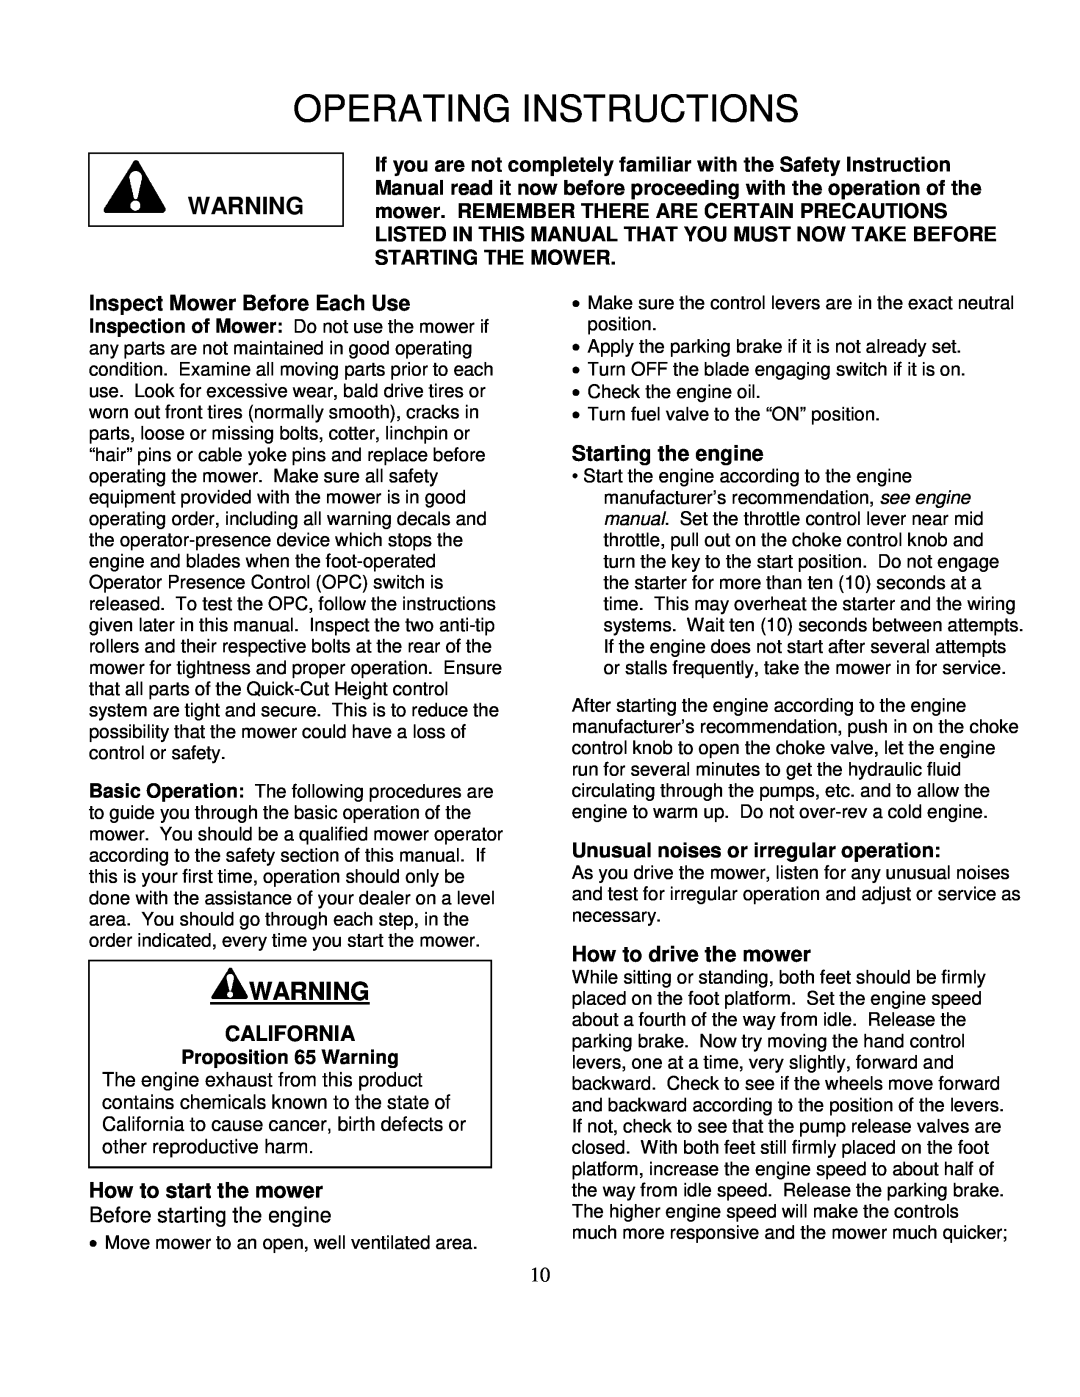 Wright Manufacturing 14SH654 Operating Instructions, Inspect Mower Before Each Use, California, How to start the mower 